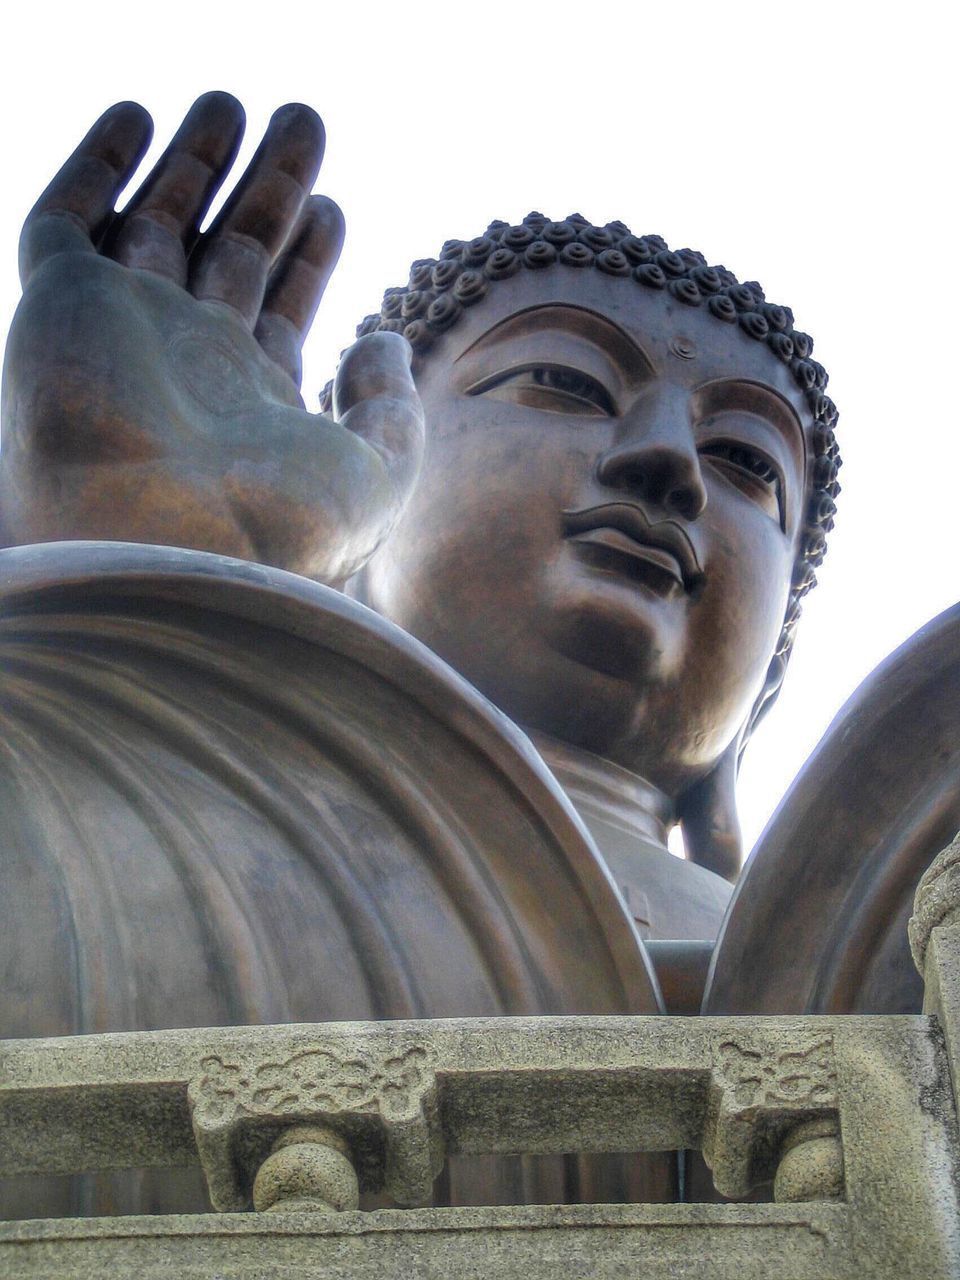 LOW ANGLE VIEW OF STATUE OF BUDDHA